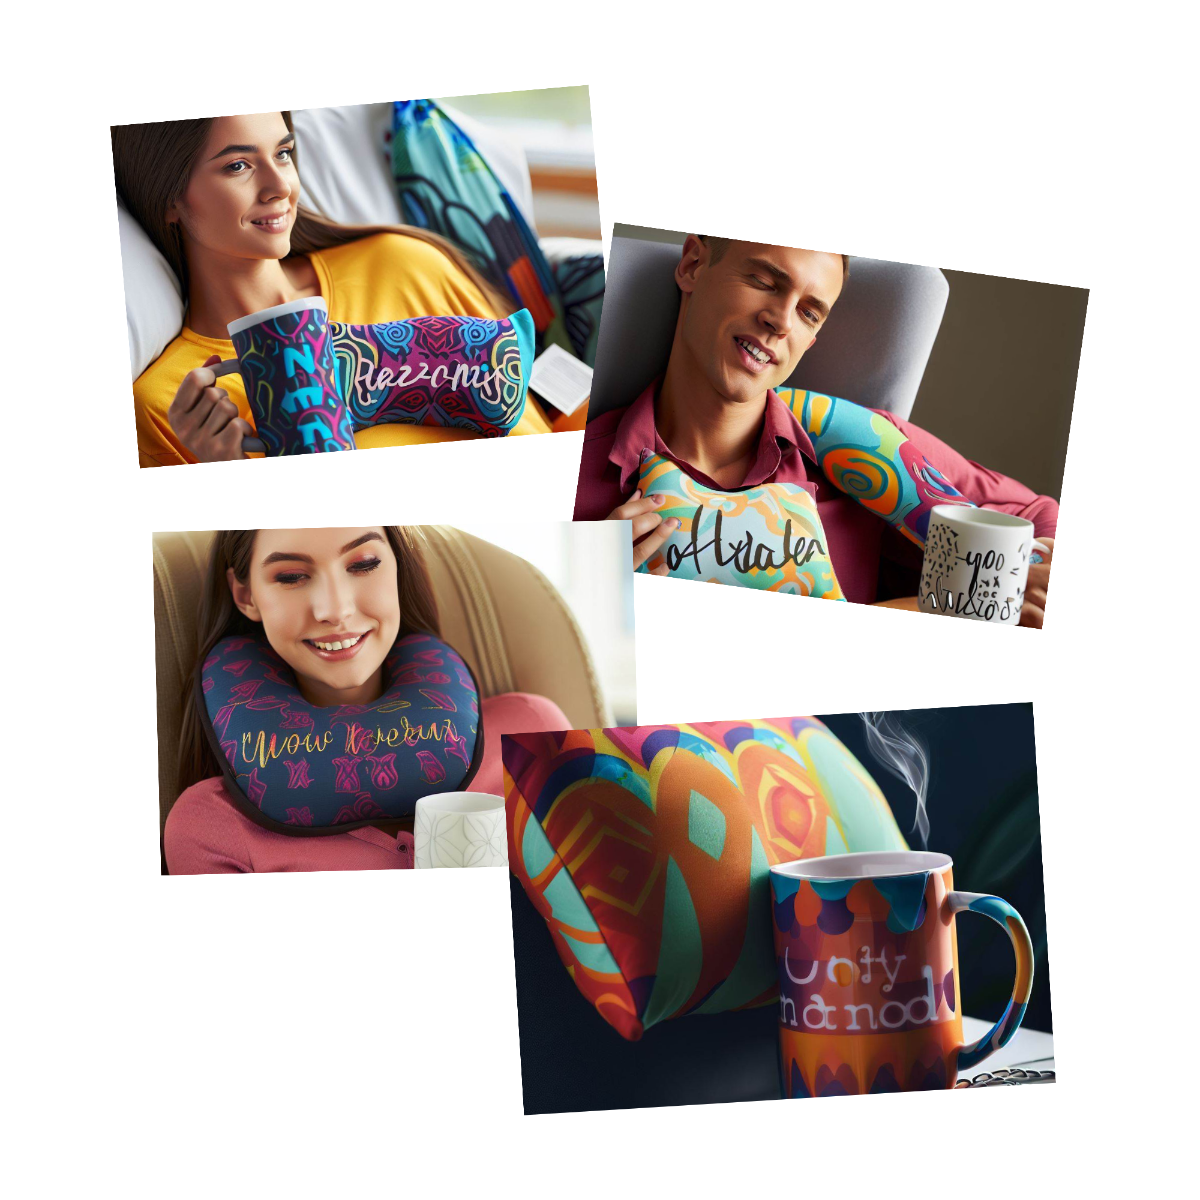 A collage image of personalized mug and personalized neck/travel pillow